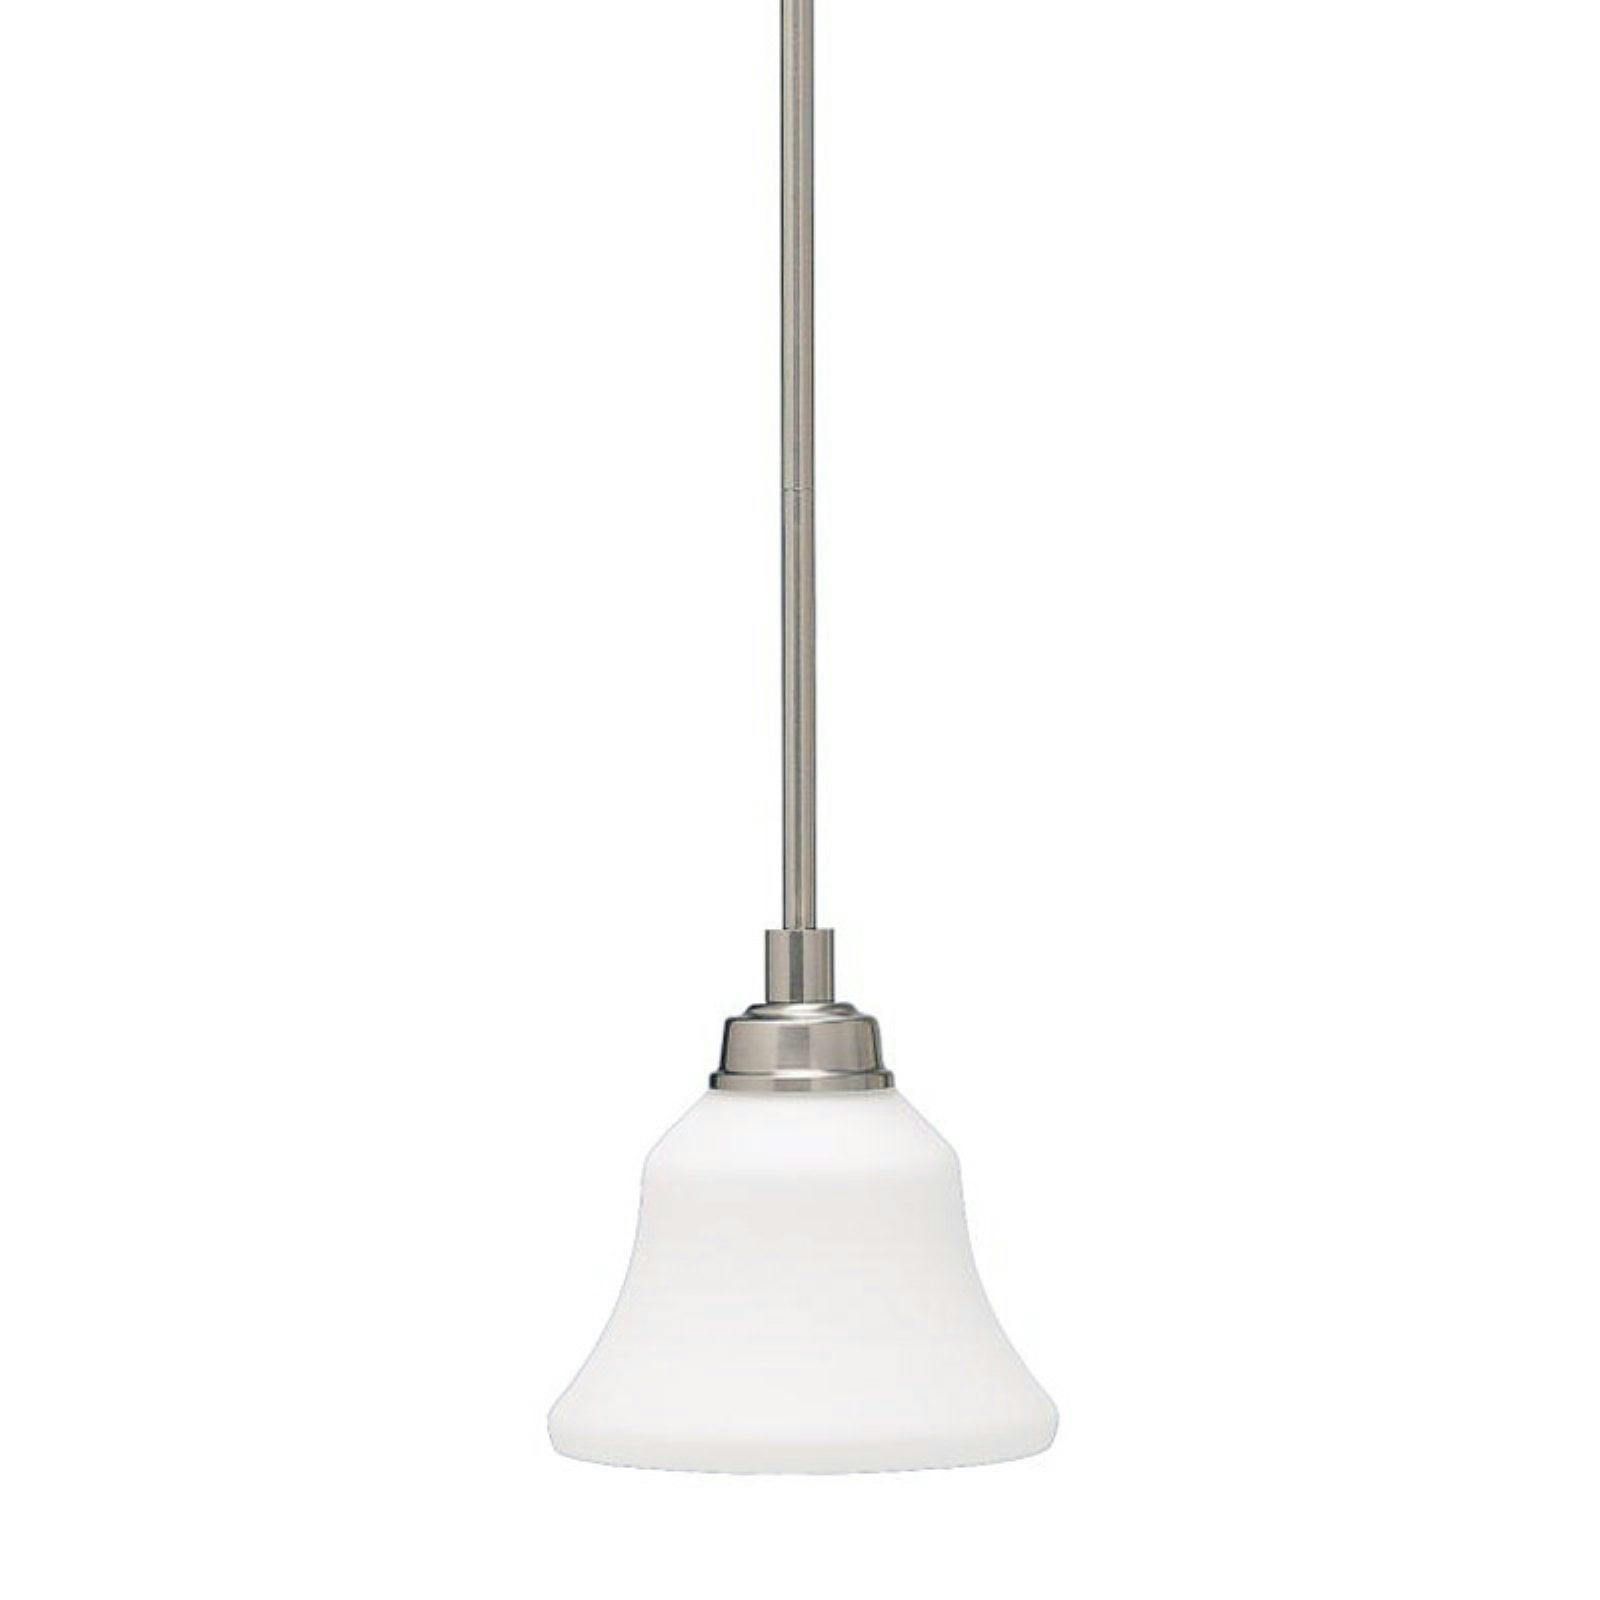 Transitional Brushed Nickel 7" Mini Pendant with Cream Glass Shade